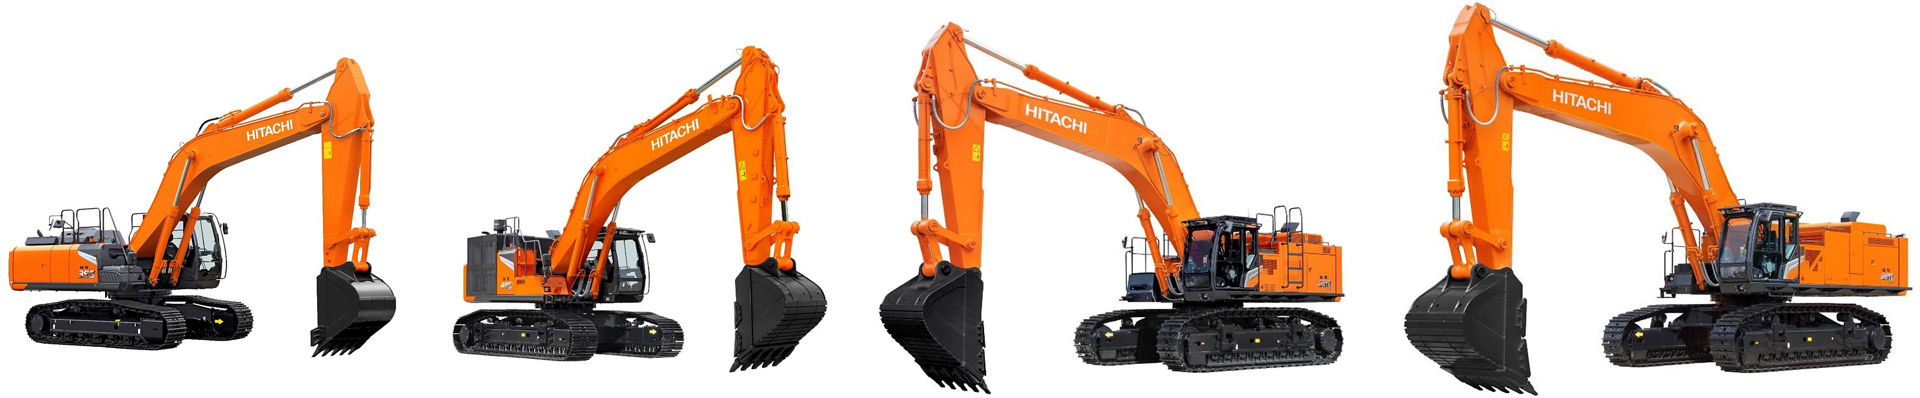 ZAXIS-7G series